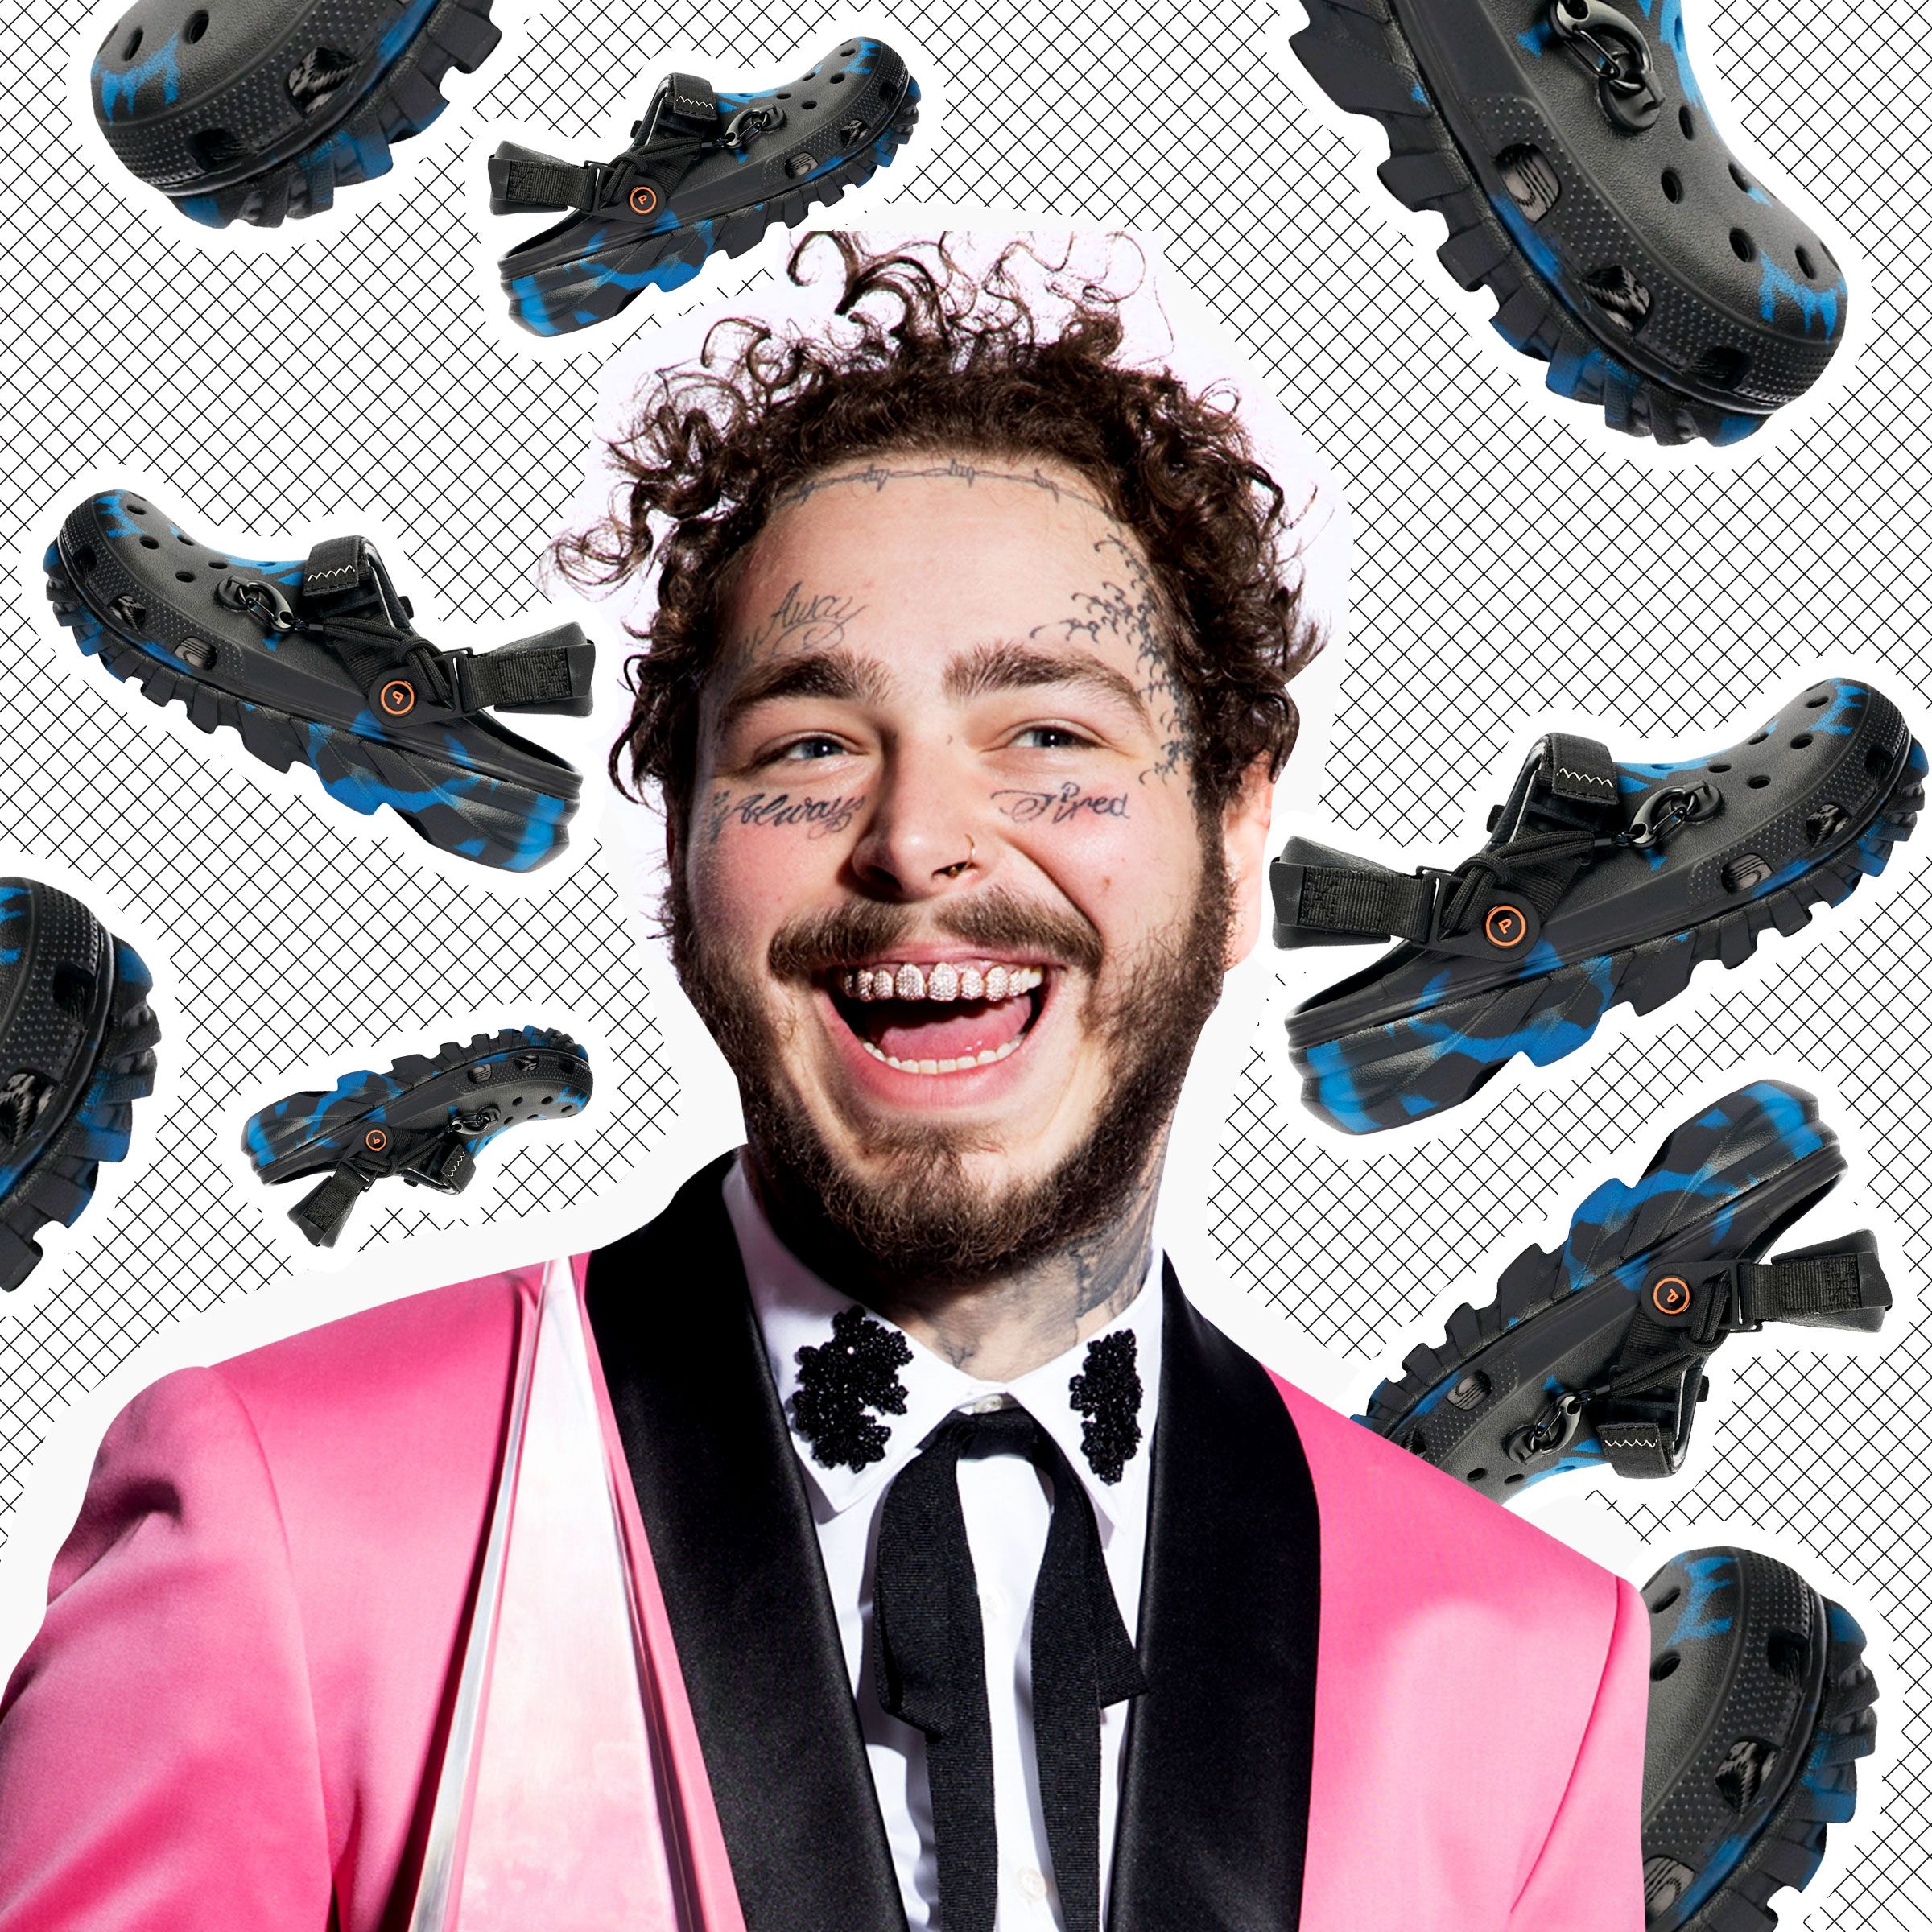 These Post Malone Crocs Sold Out Immediately